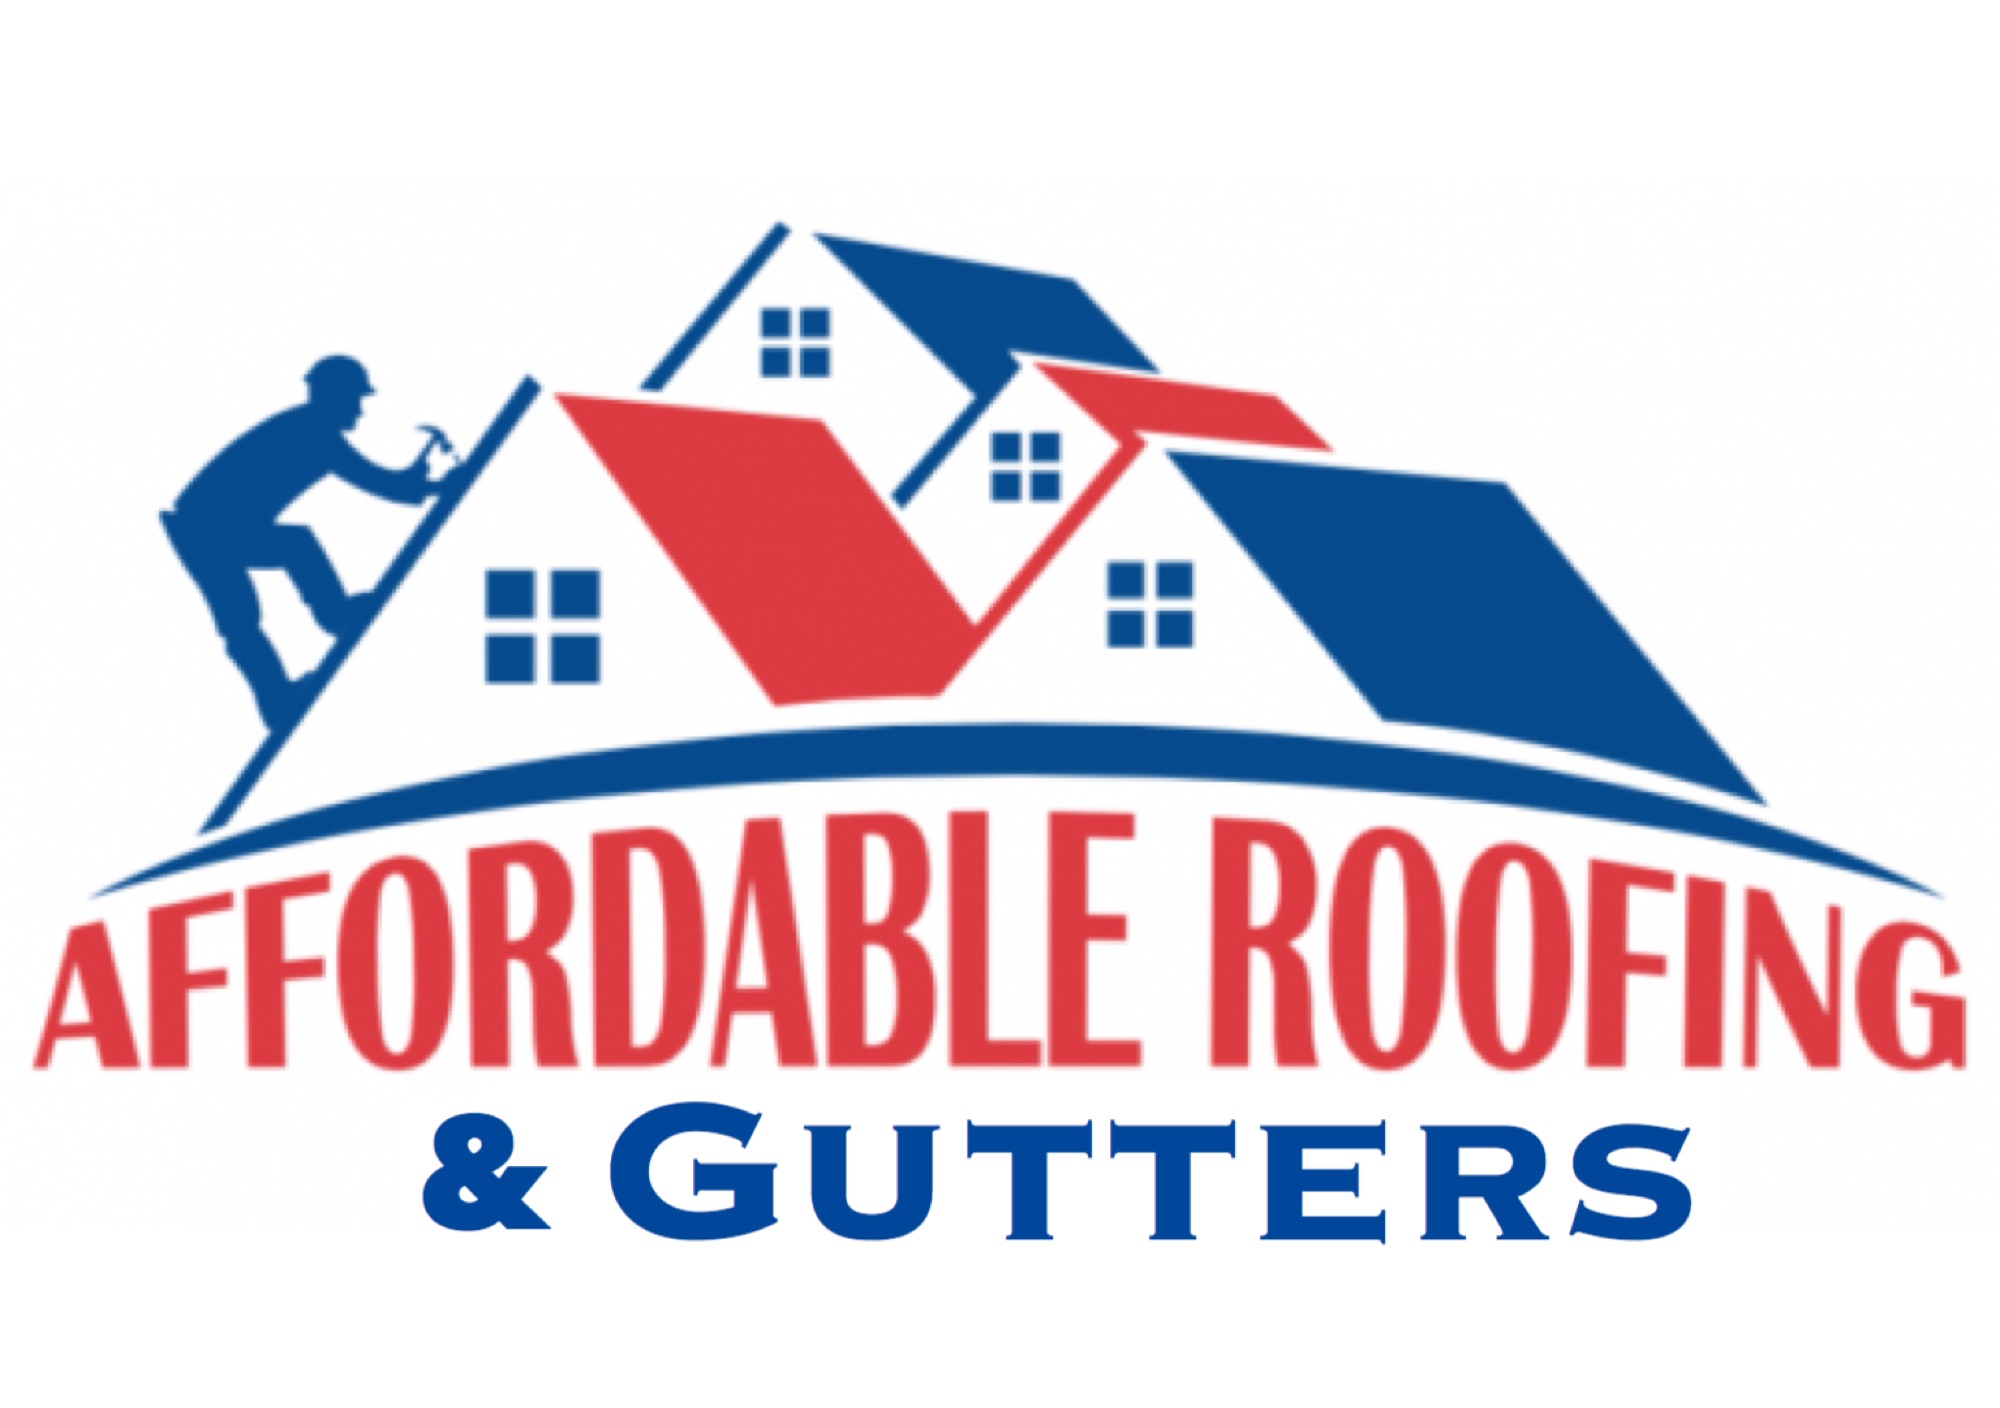 Affordable Roofing & Gutters Logo